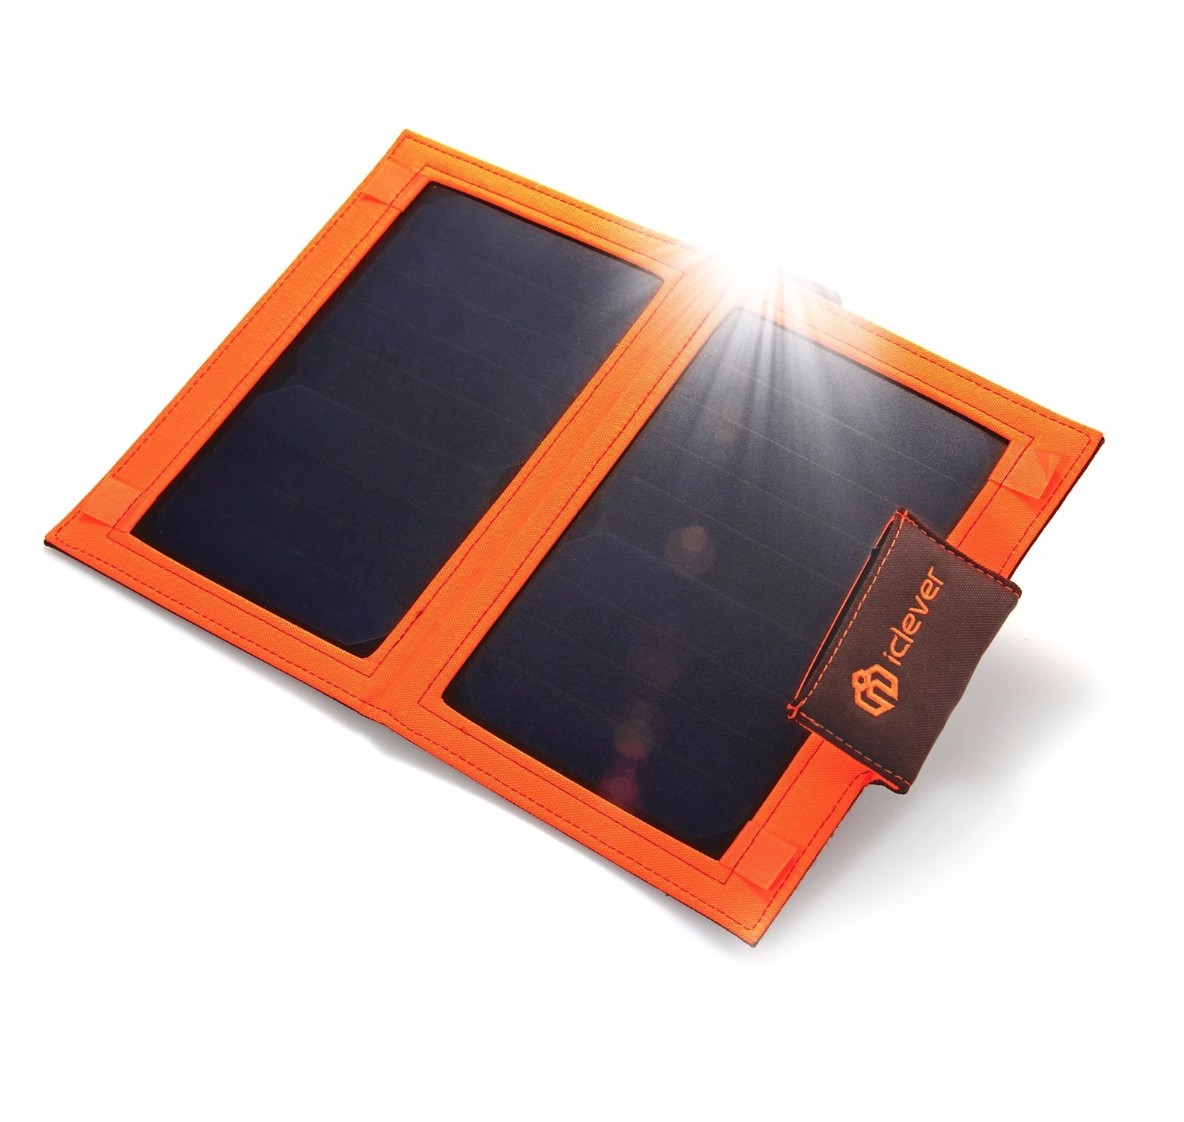 iclever boostcel 12w portable solar charger review